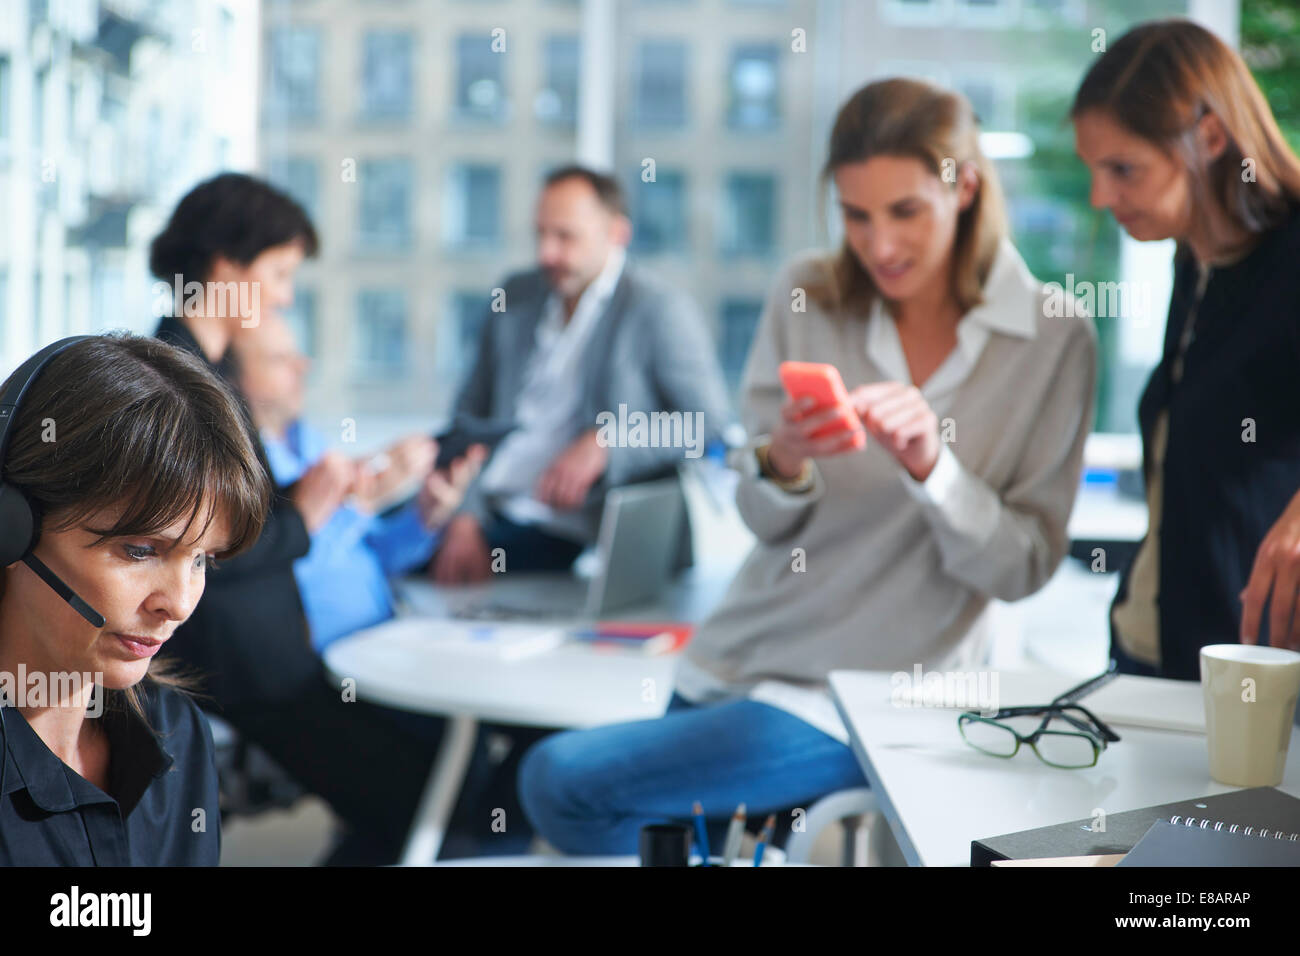 Six businesswomen and men busy working in office Stock Photo